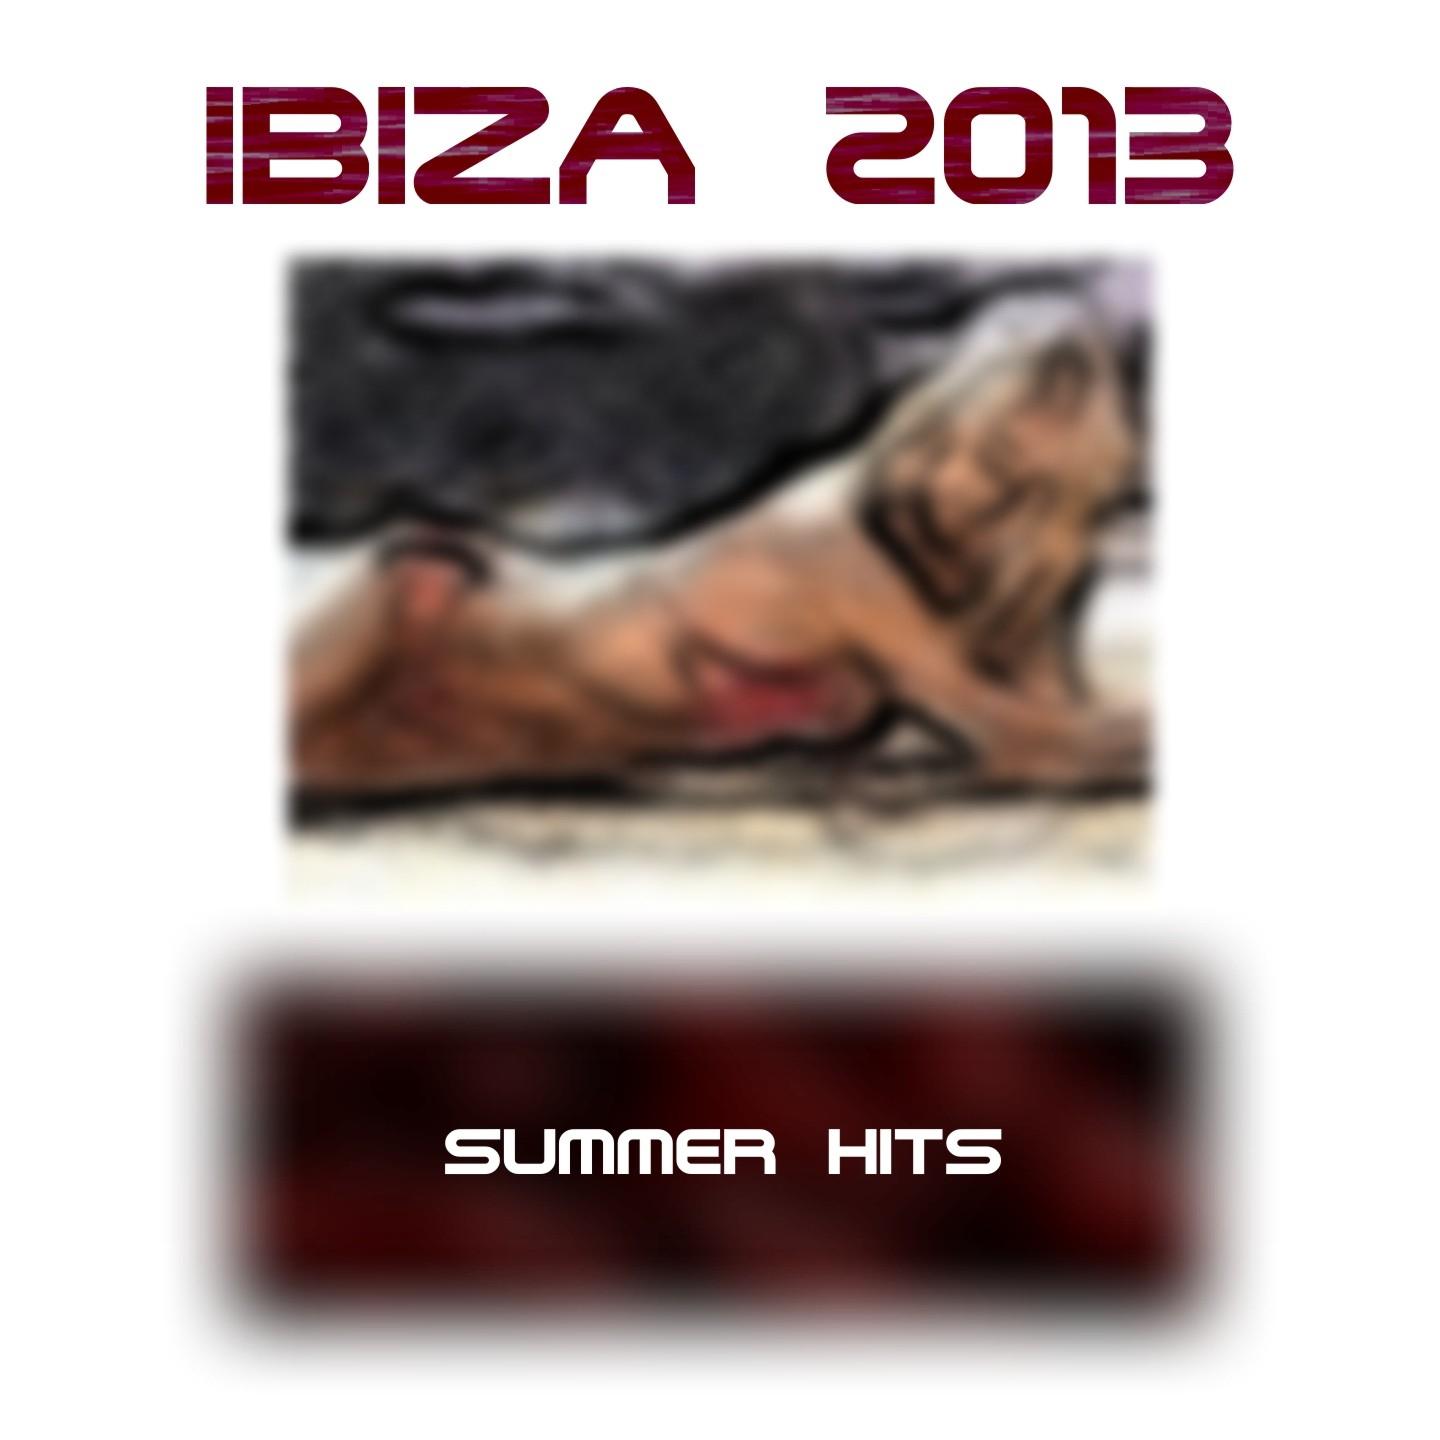 Ibiza 2013 Summer Hits (40 Super Hits Dance and Electro for Djs)